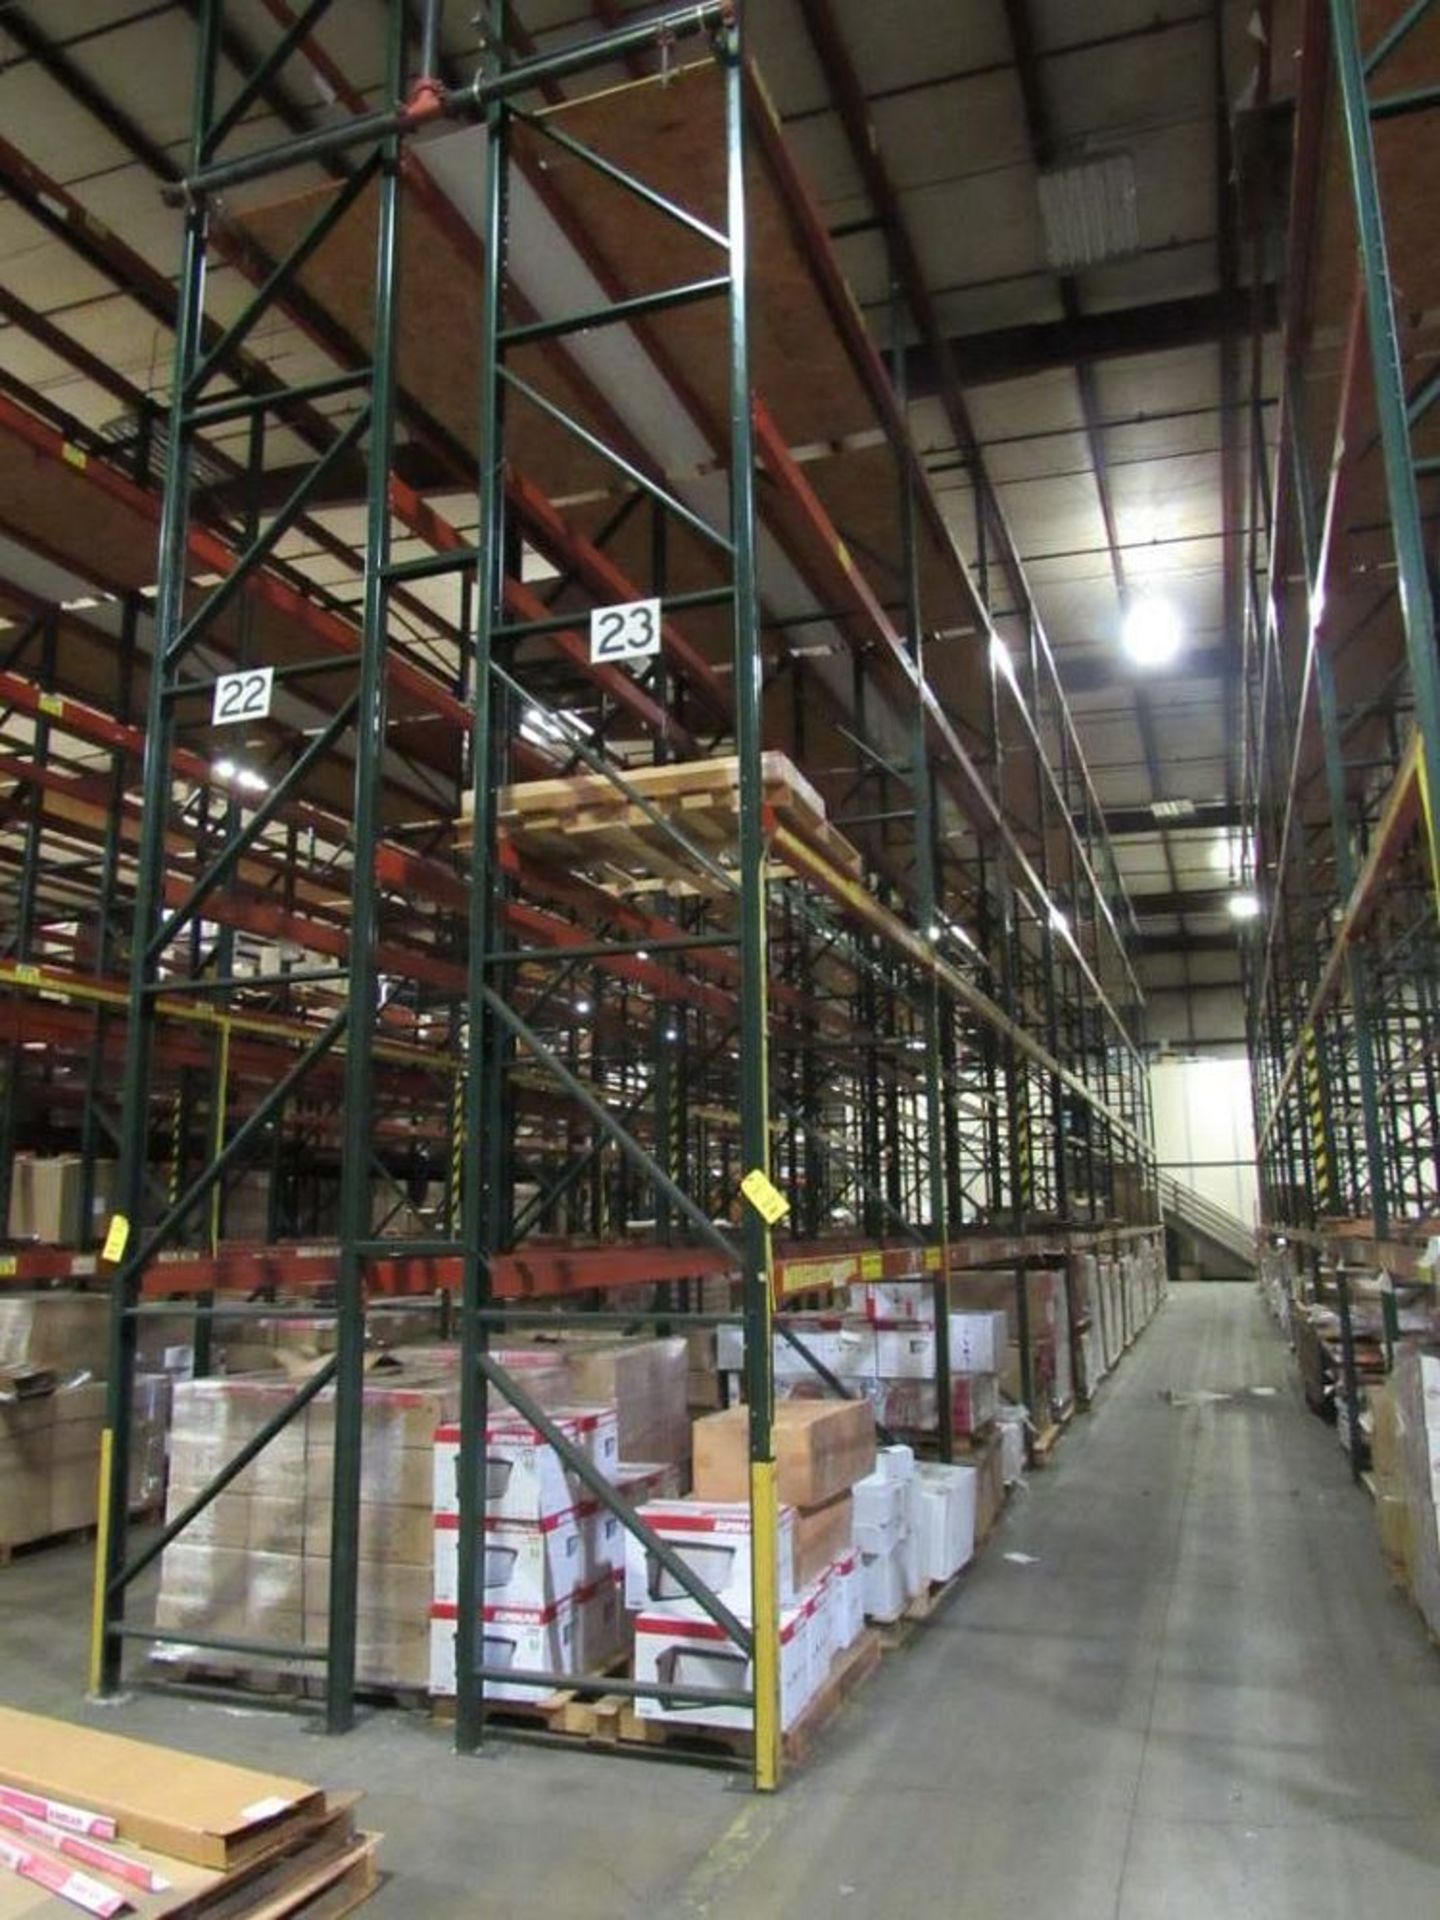 LOT: (9) Sections 42 in. x 108 in. x 24 ft. High (est.) Adjustable Steel Pallet Rack (delay removal)